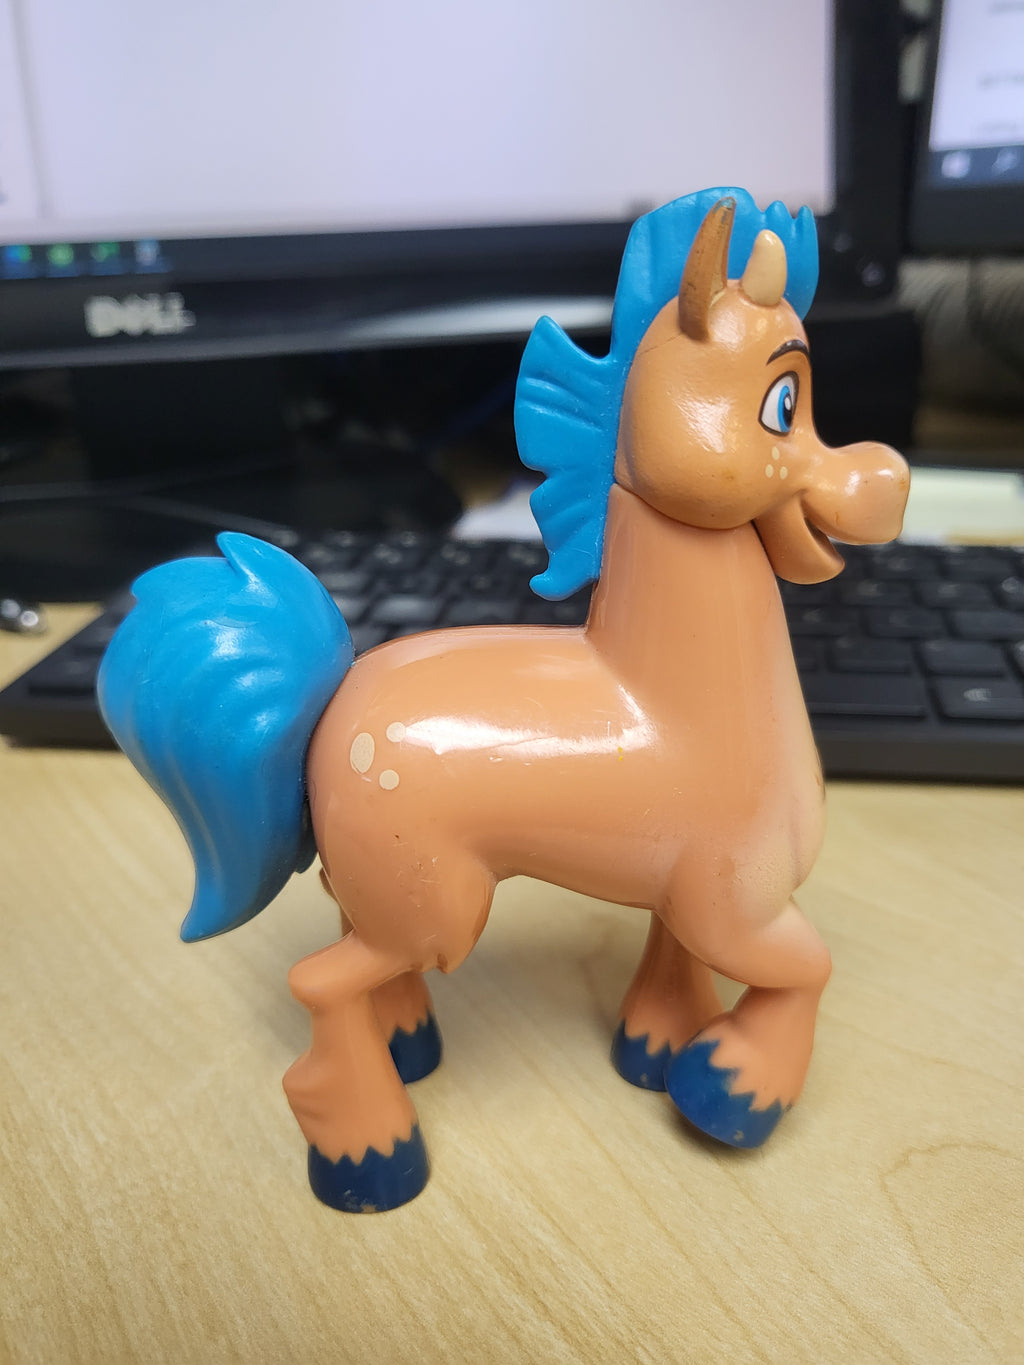 2018 Nickelodeon Nella The Princess Horse Replacement Toy Figure